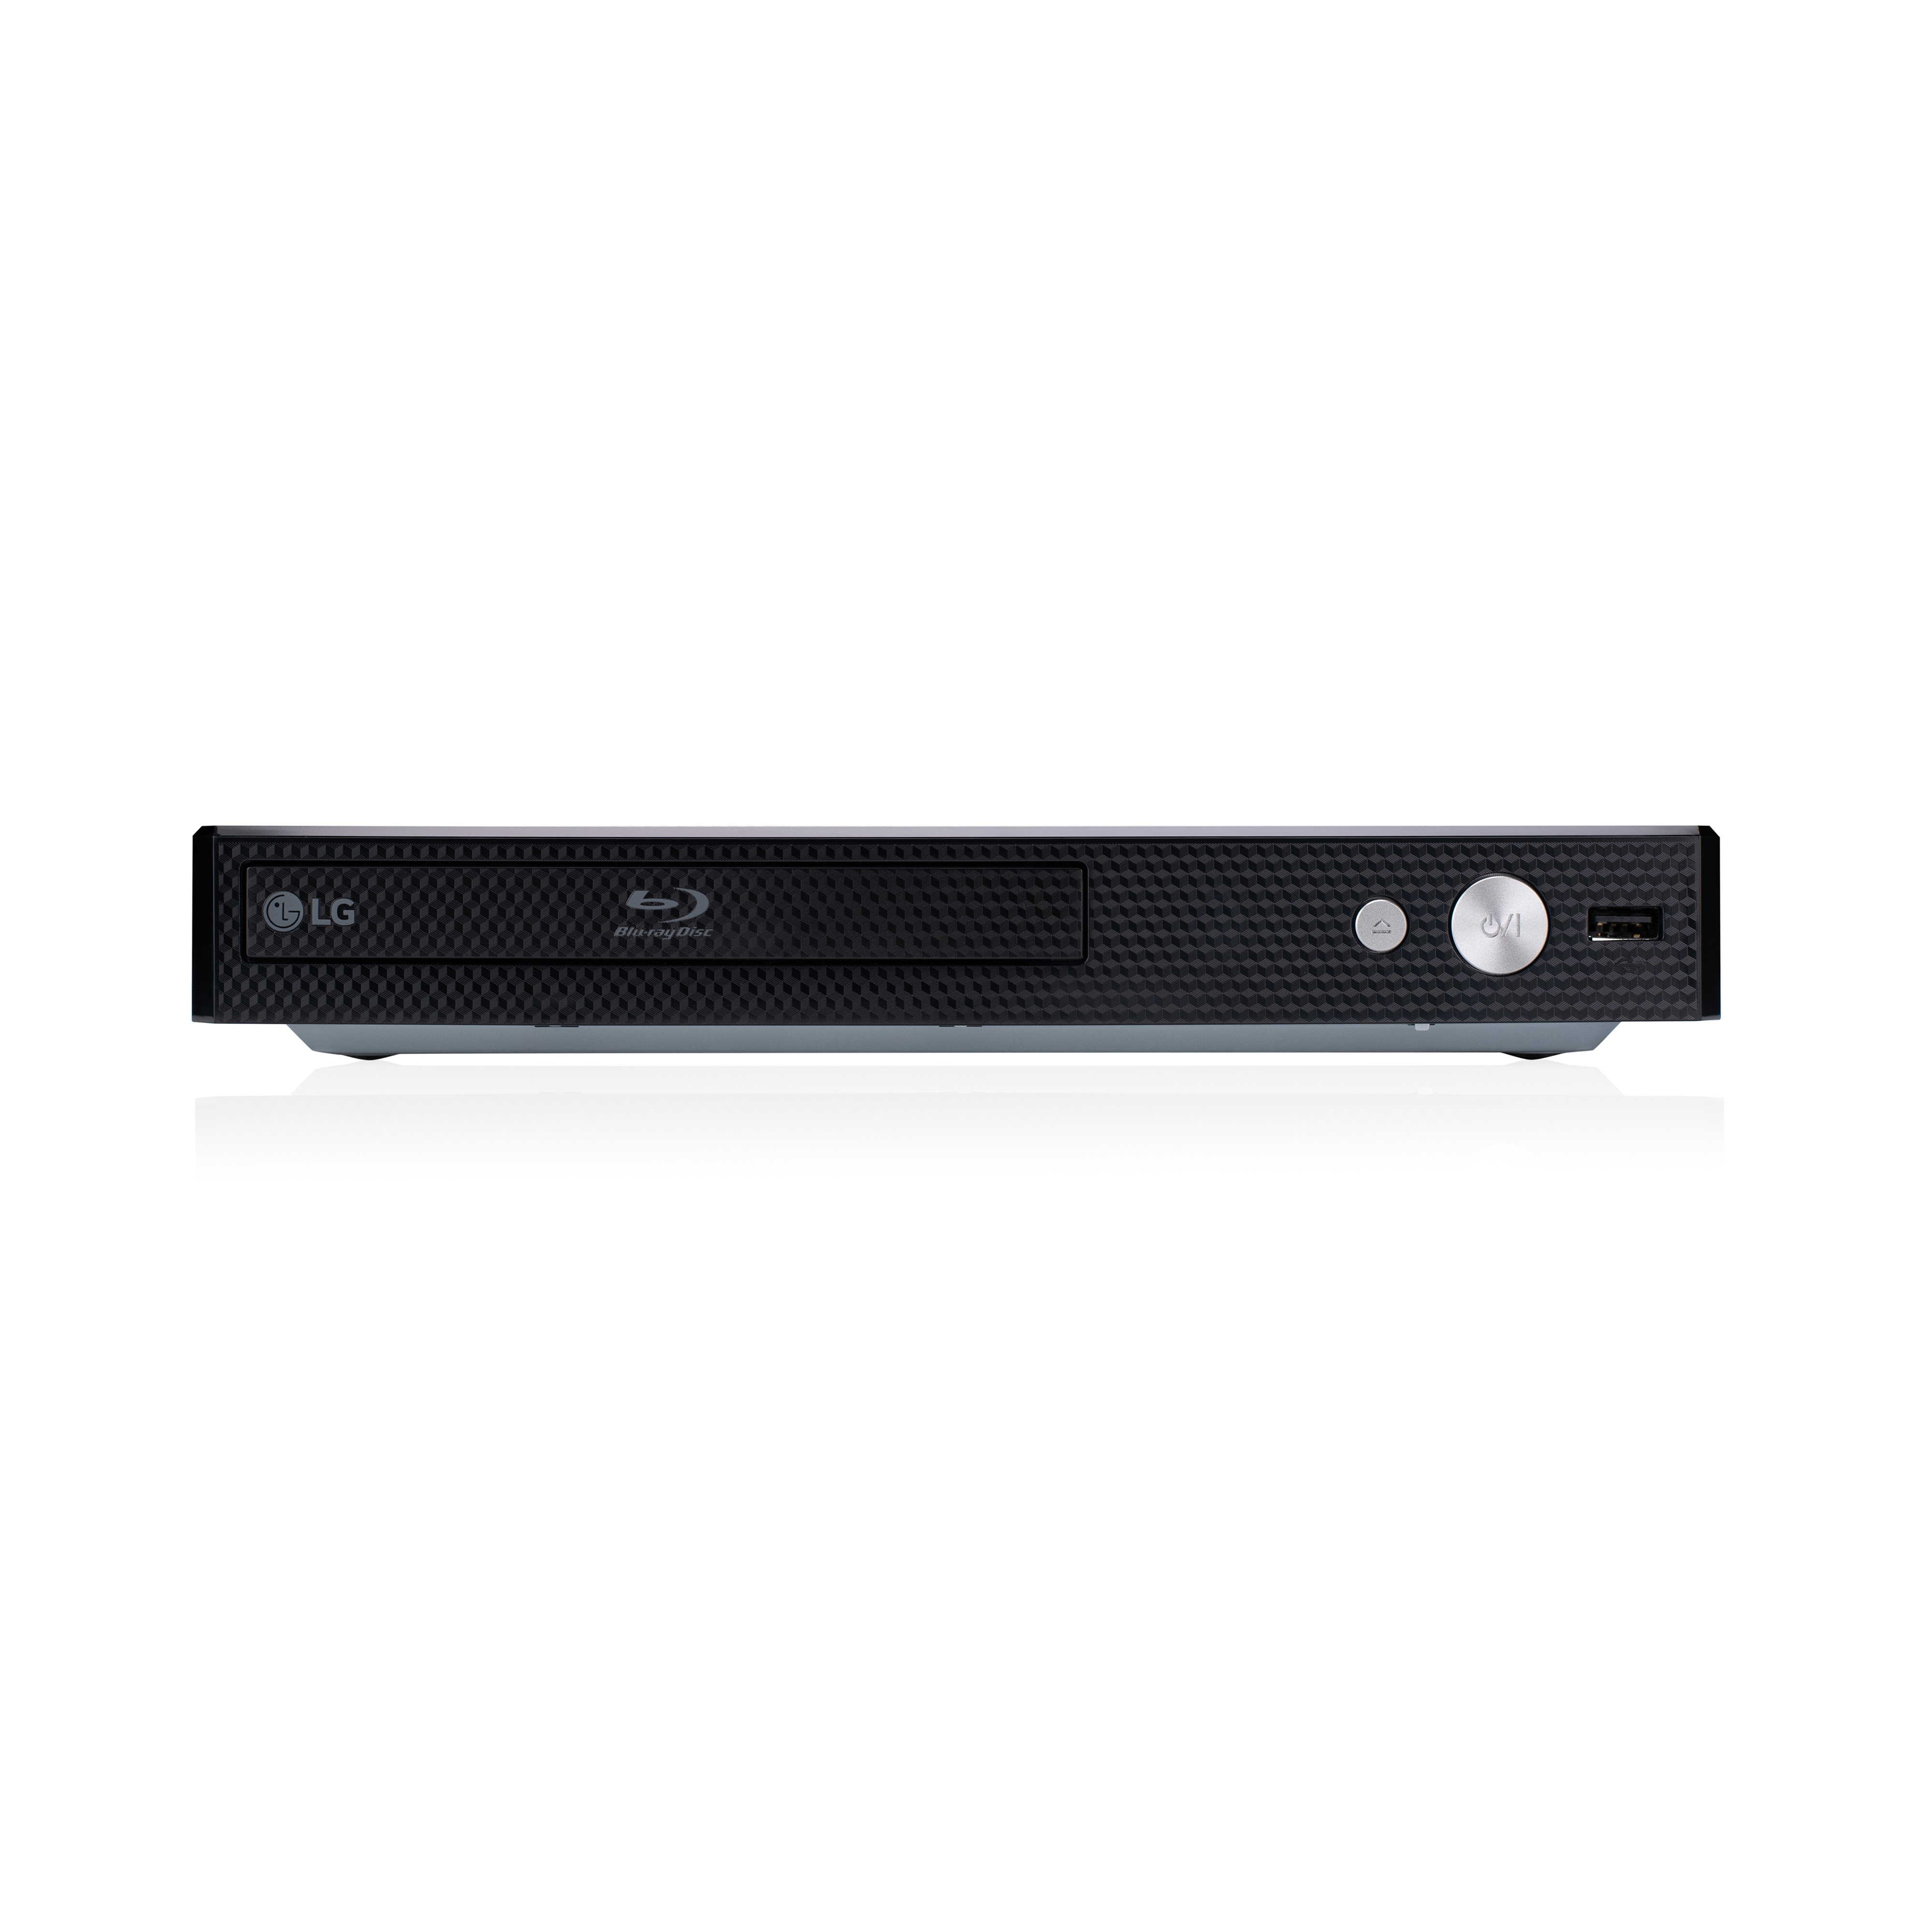 LG BPM26 Blu-ray Player with Streaming Services - image 5 of 10